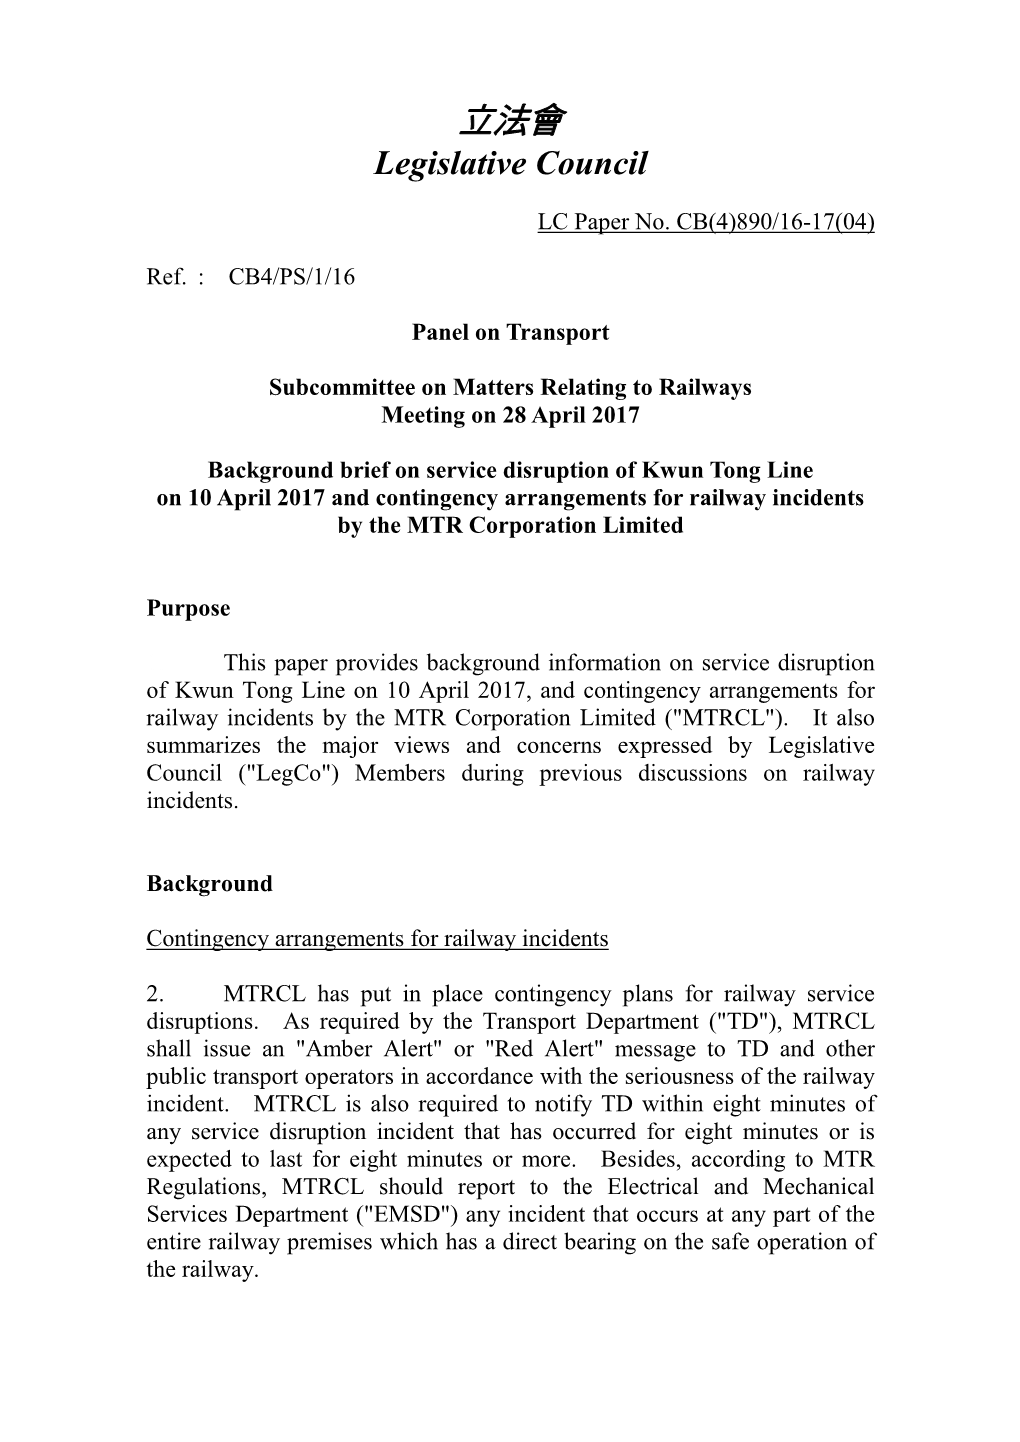 Paper on Service Disruption of Kwun Tong Line on 10 April 2017